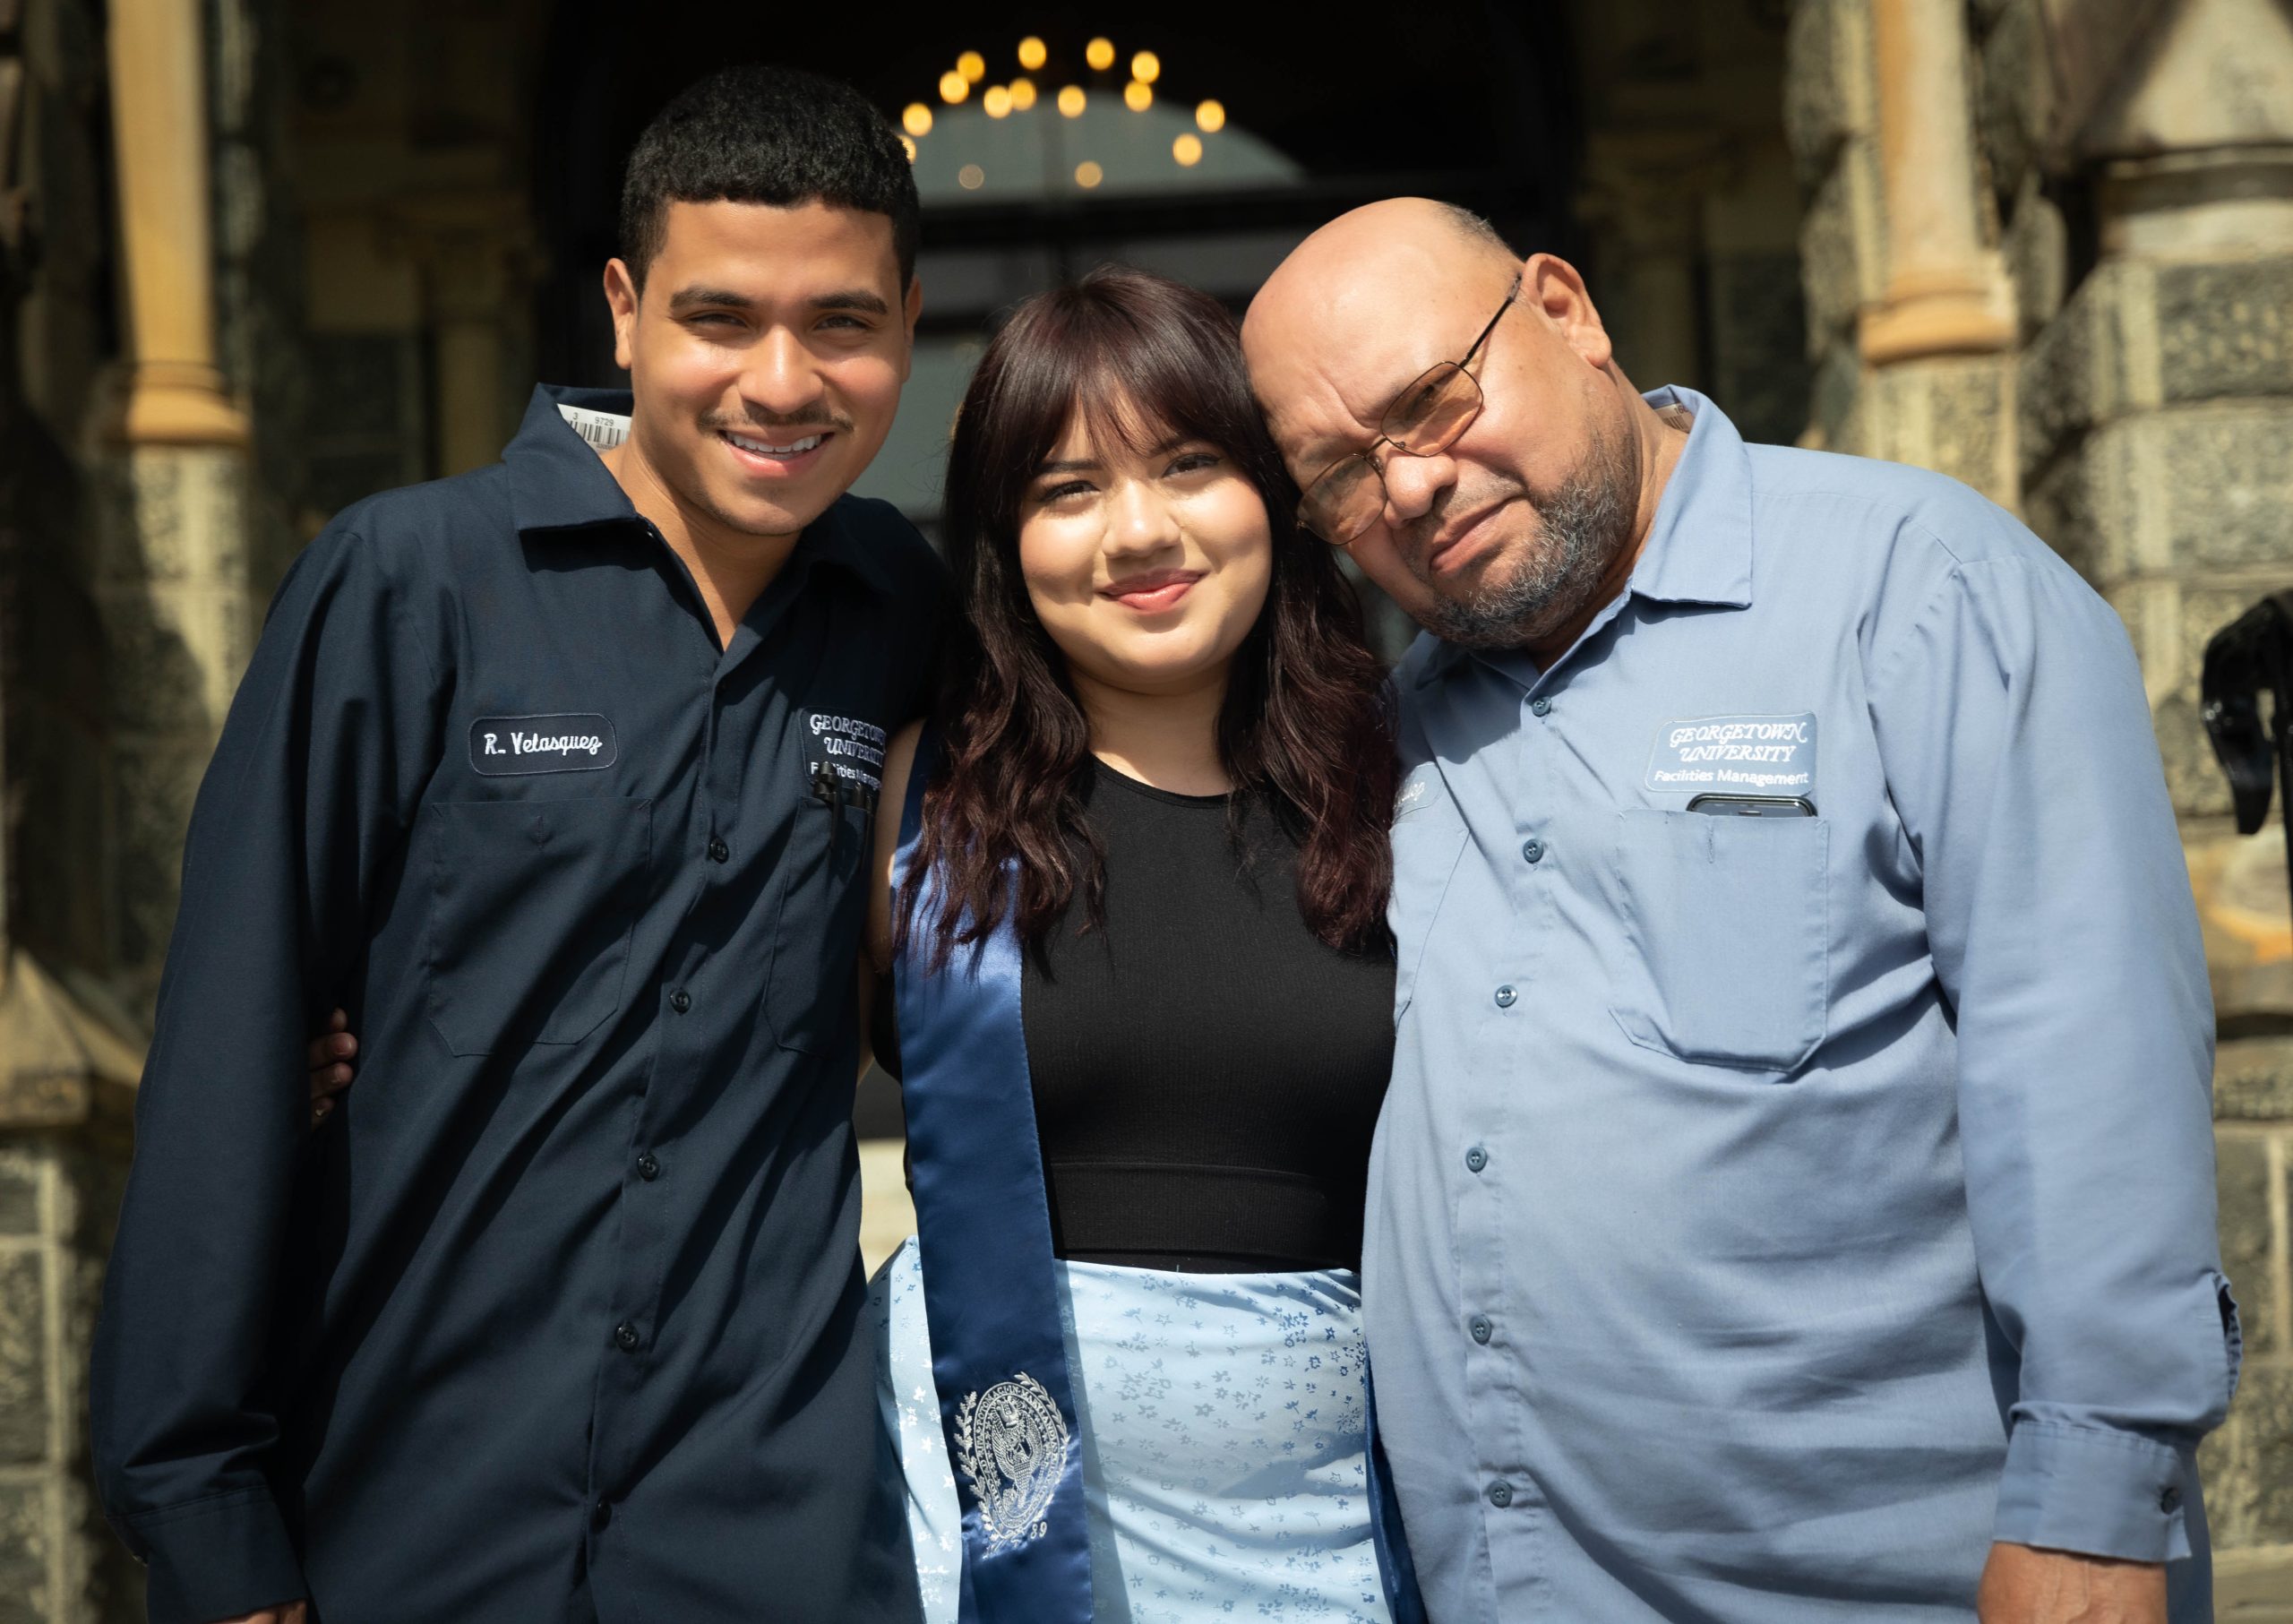 The Velasquez family stands on the front steps of Healy Hall posing for a picture. Reynaldo (left), Gaby (center) and Francisco (right) smile at the camera.